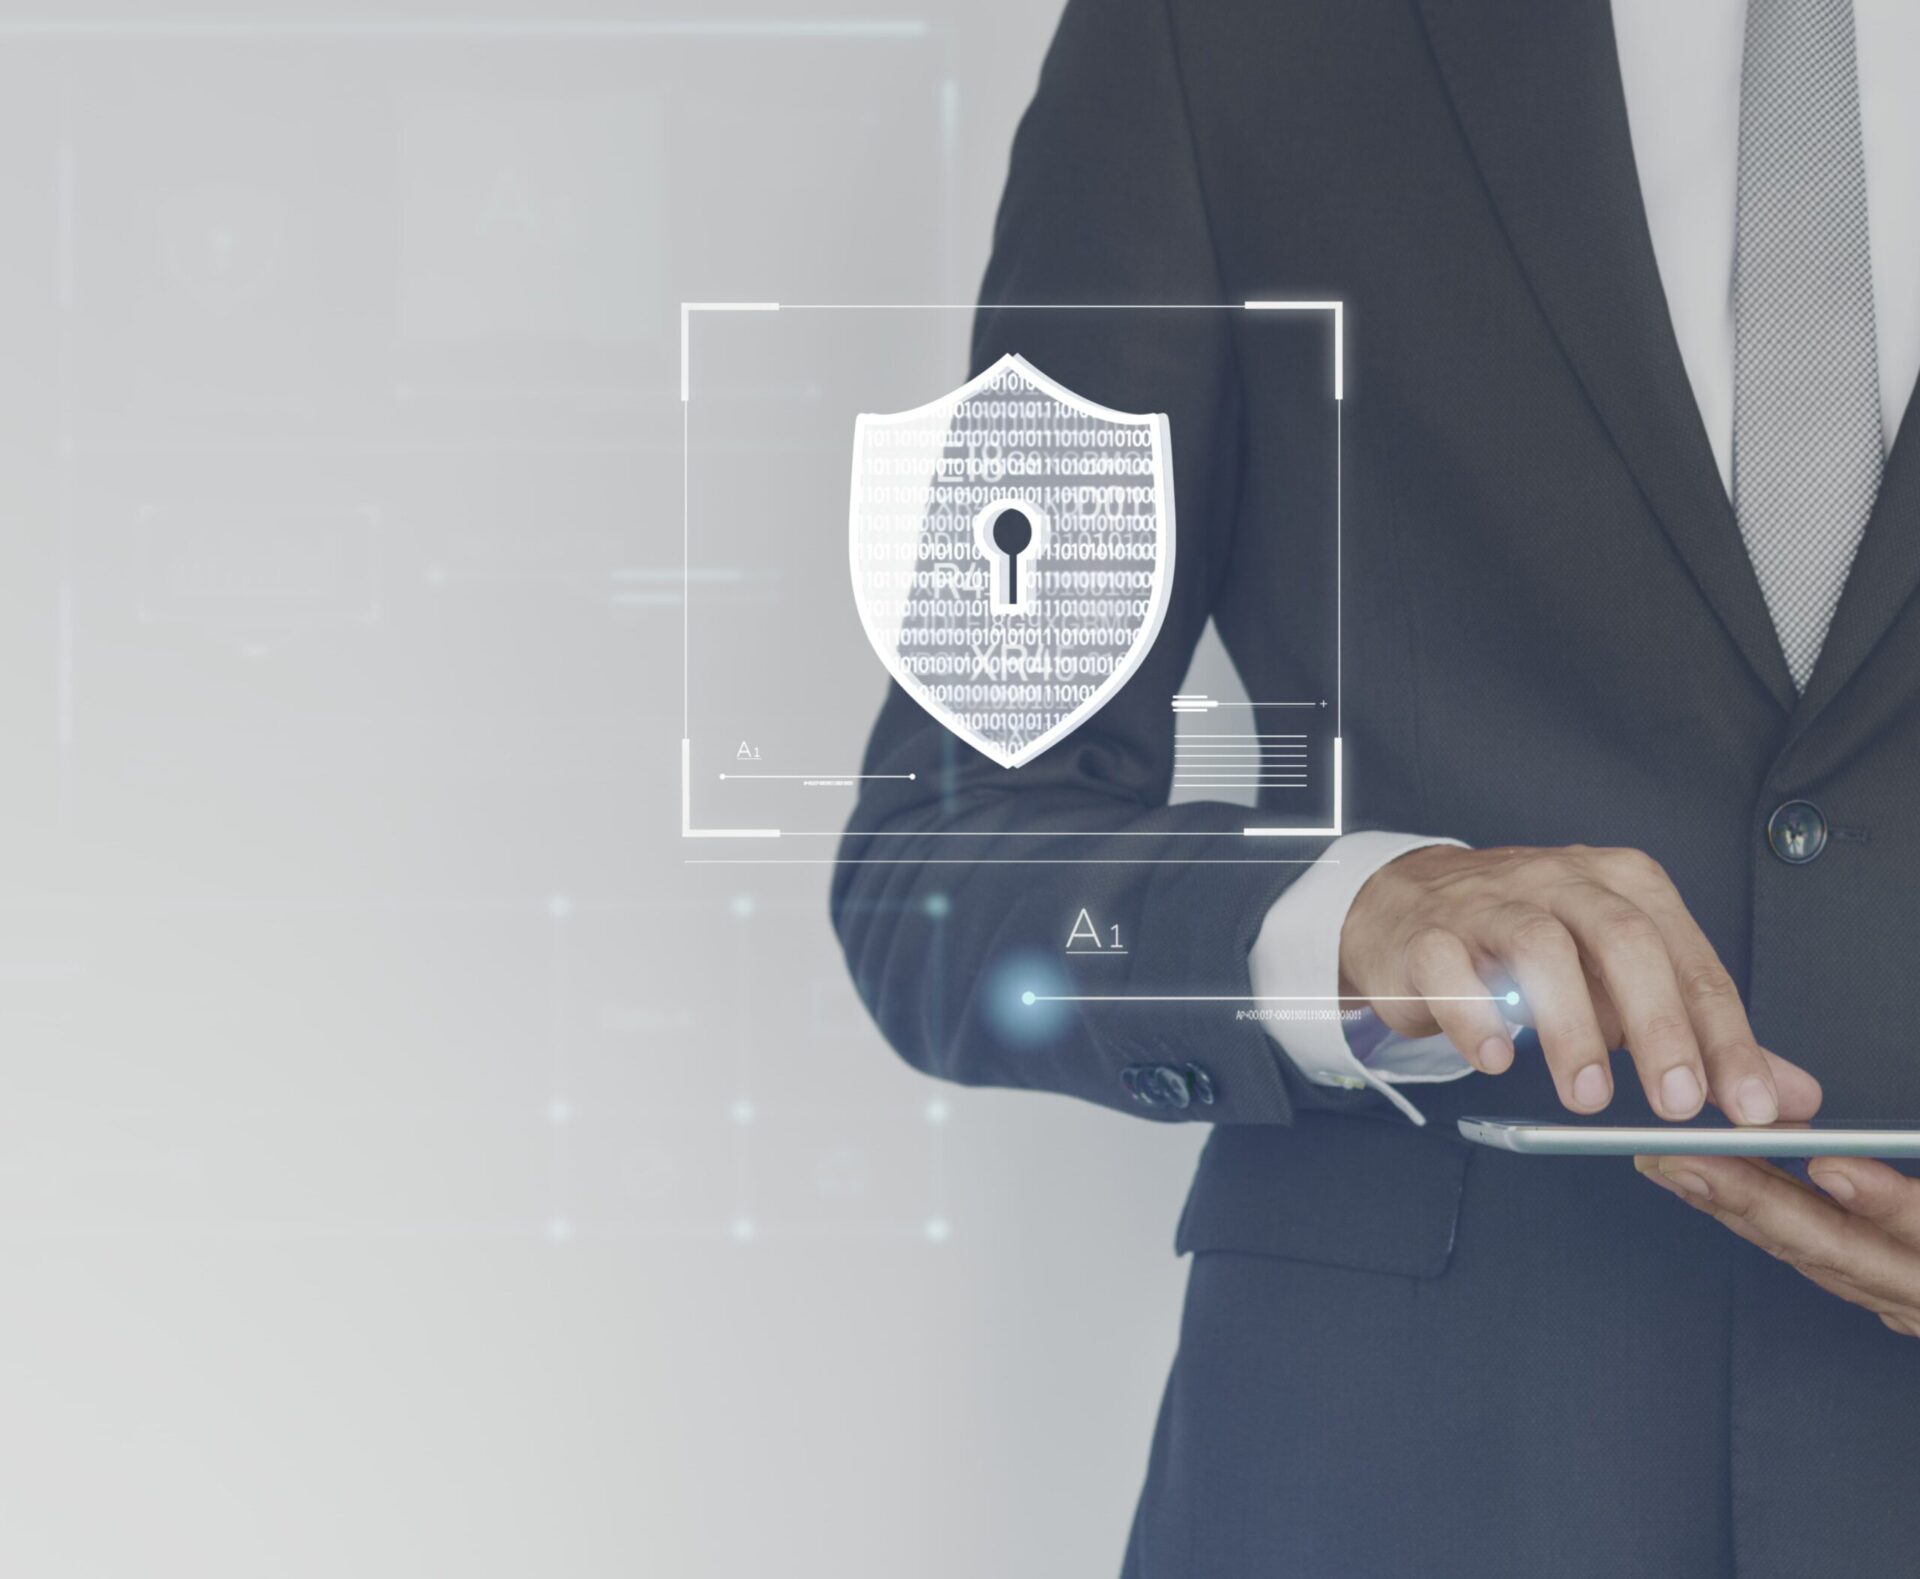 Practitioner Certificate in Personal Data Protection (Singapore) 2020 (WSQ)